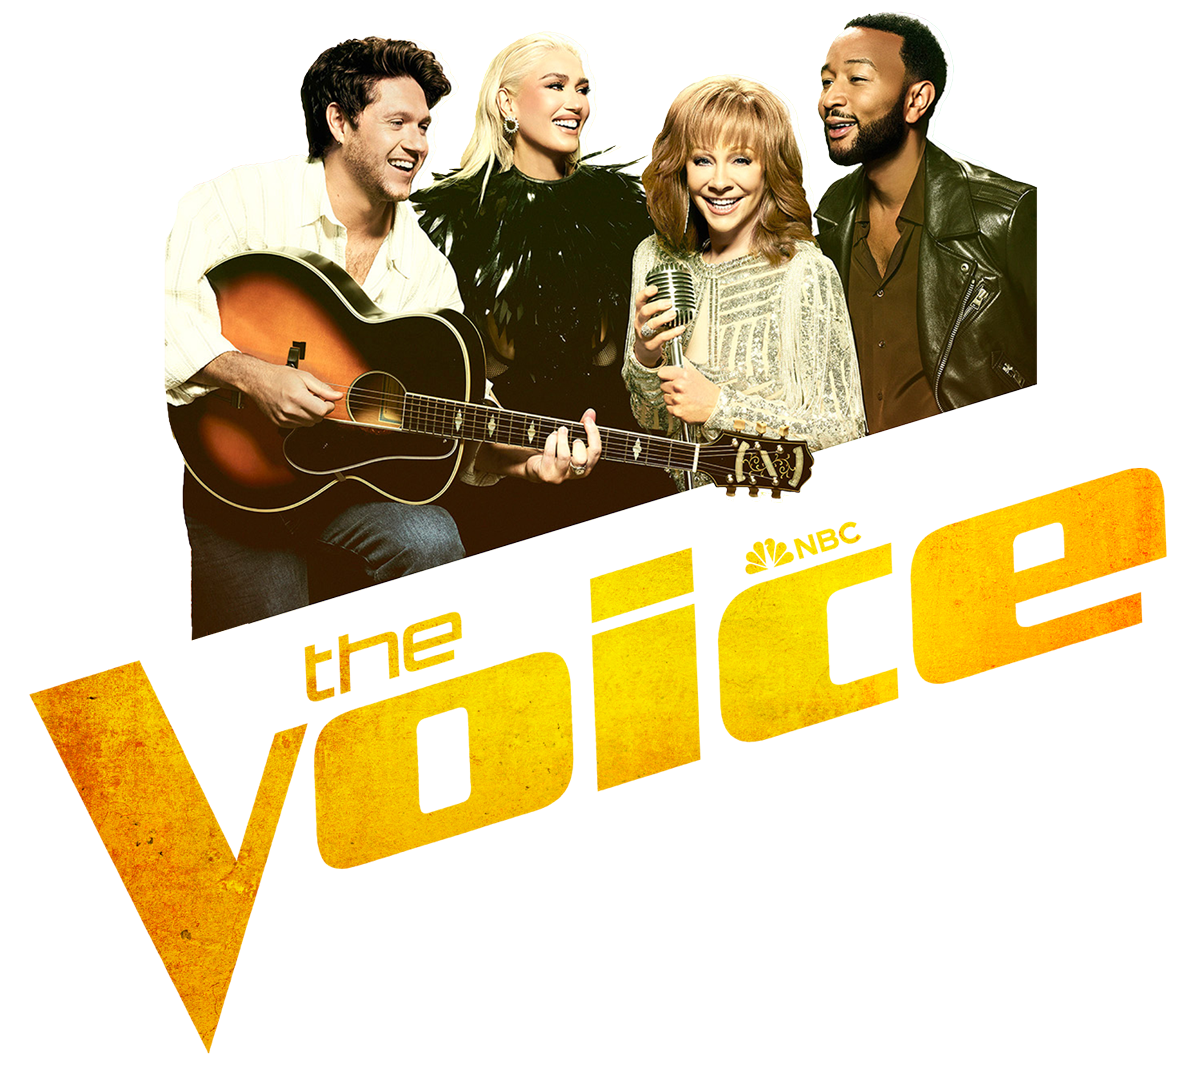 Audition for The Voice  NBC The Voice - Official Casting